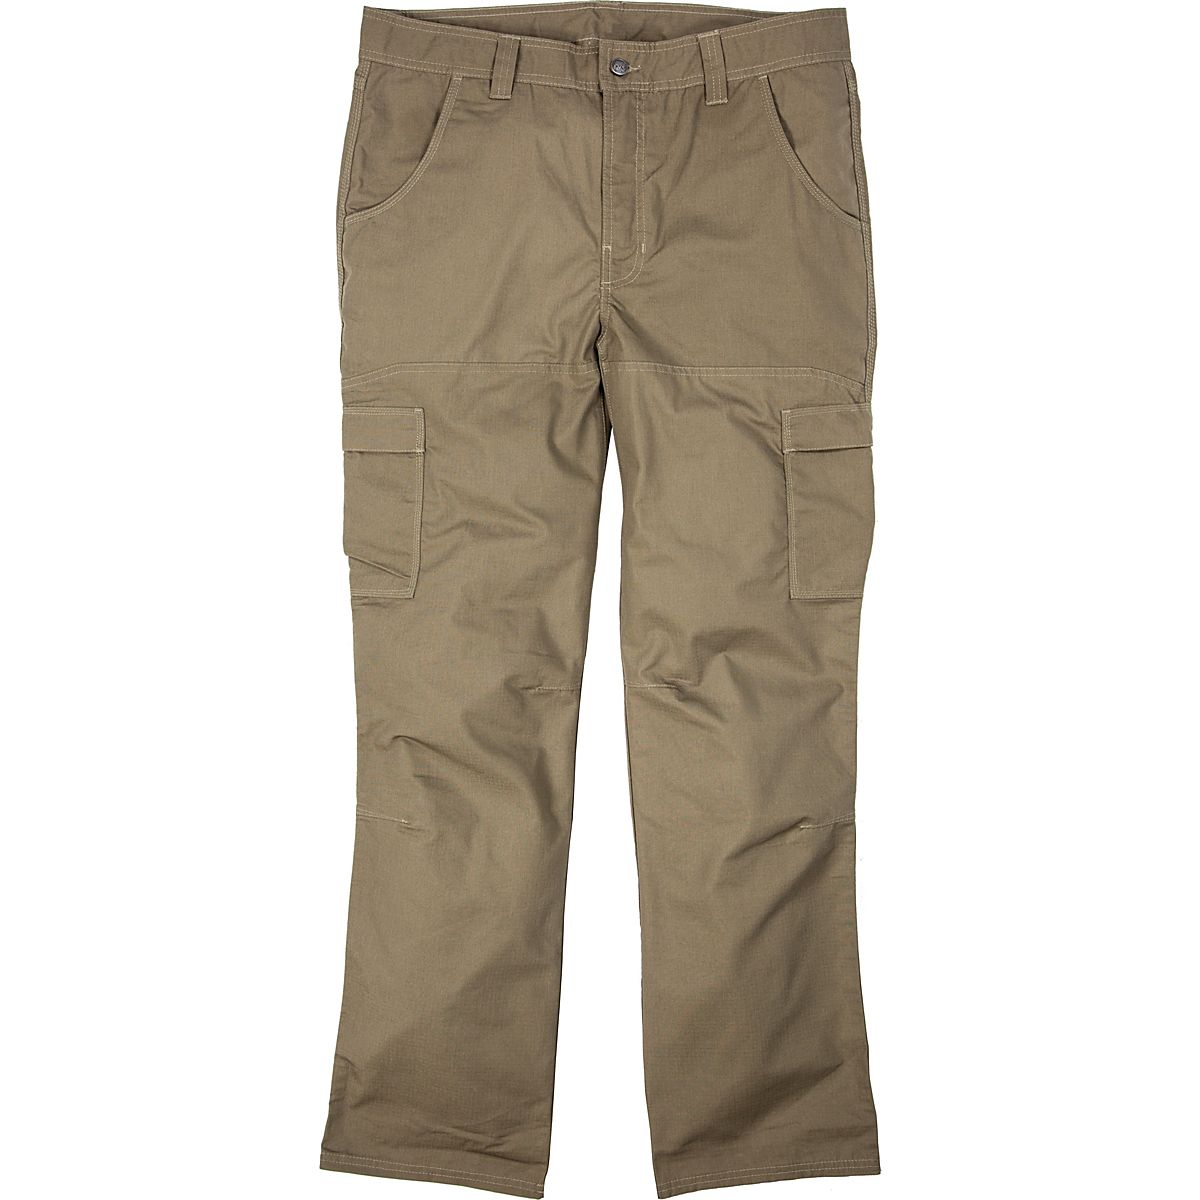 Berne Men's Ripstop Cargo Pants | Free Shipping at Academy